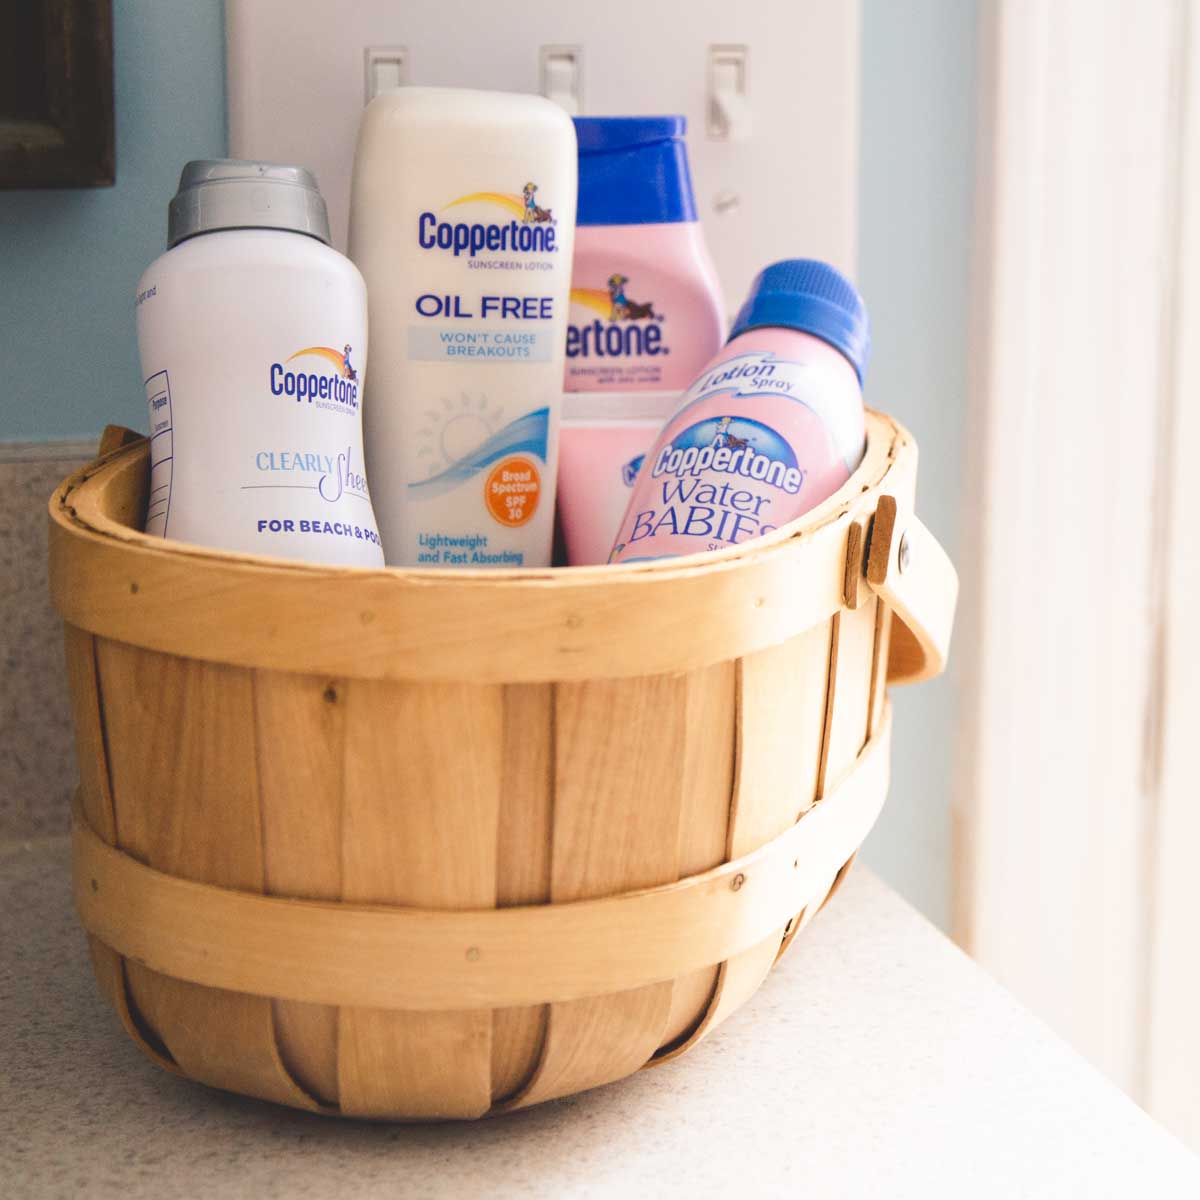 A basket filled with bottles of sunblock sits on a counter.